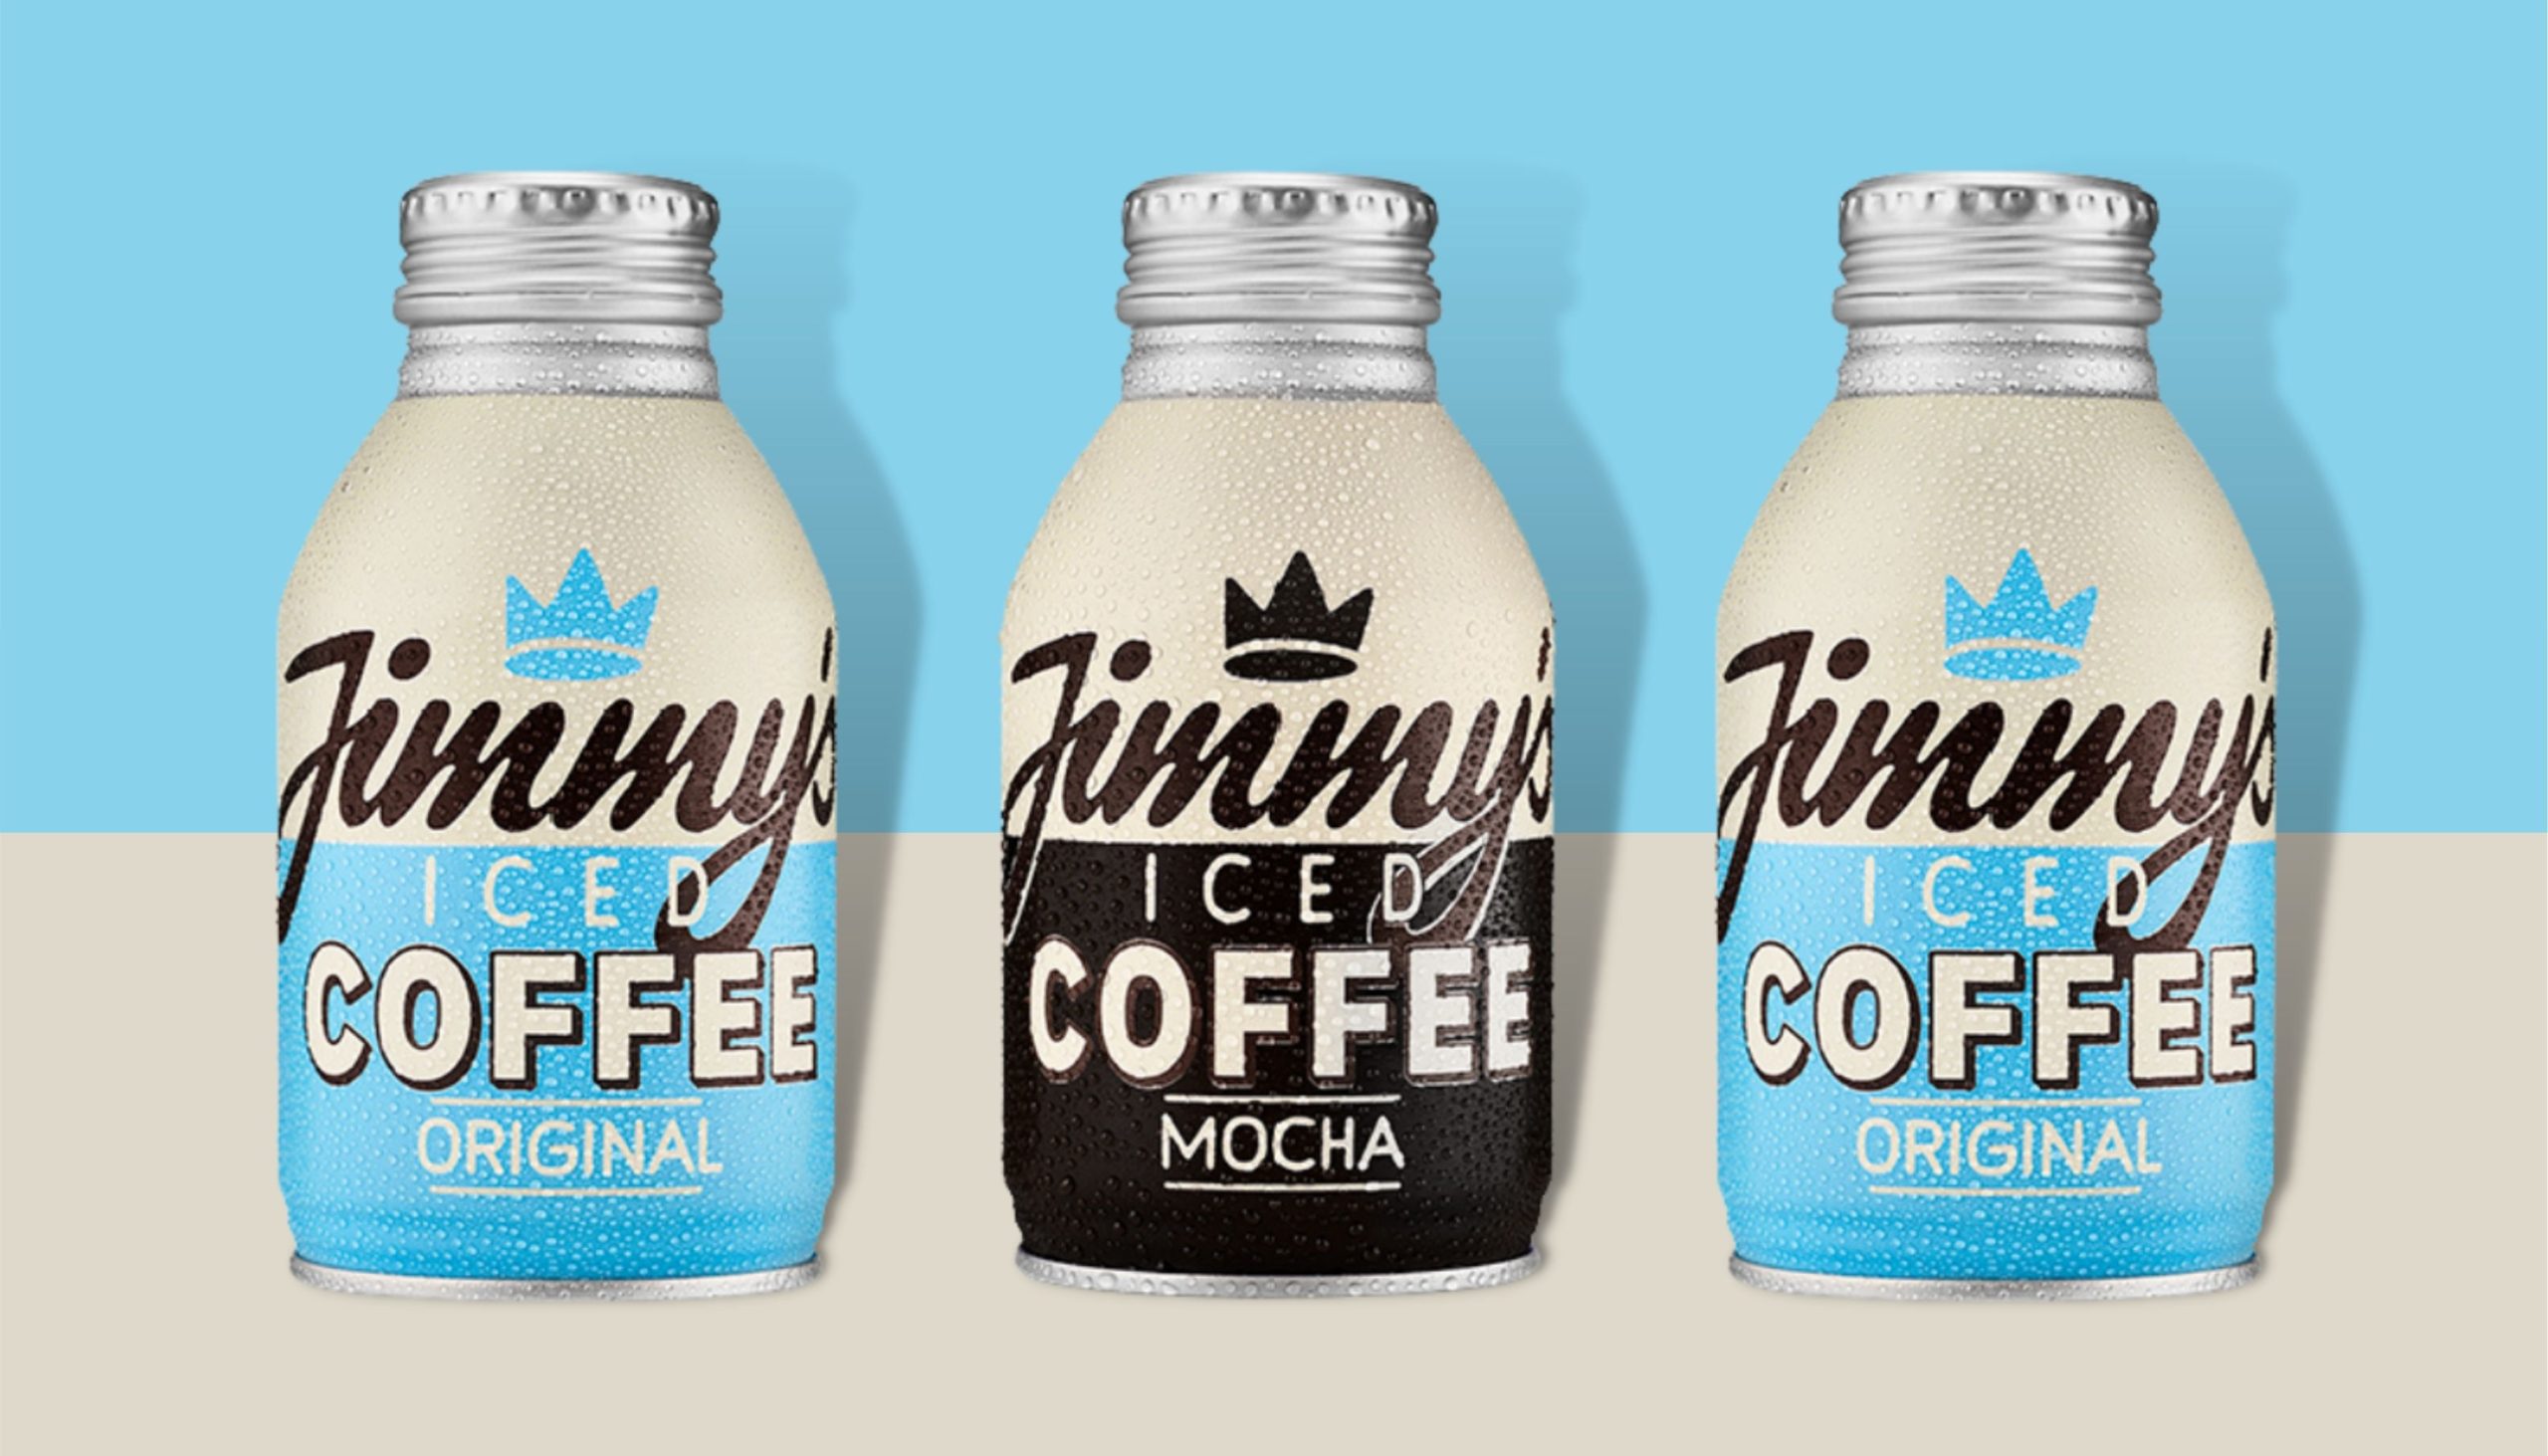 Jimmy's Iced Coffee are switching to infinitely recyclable aluminium BottleCans